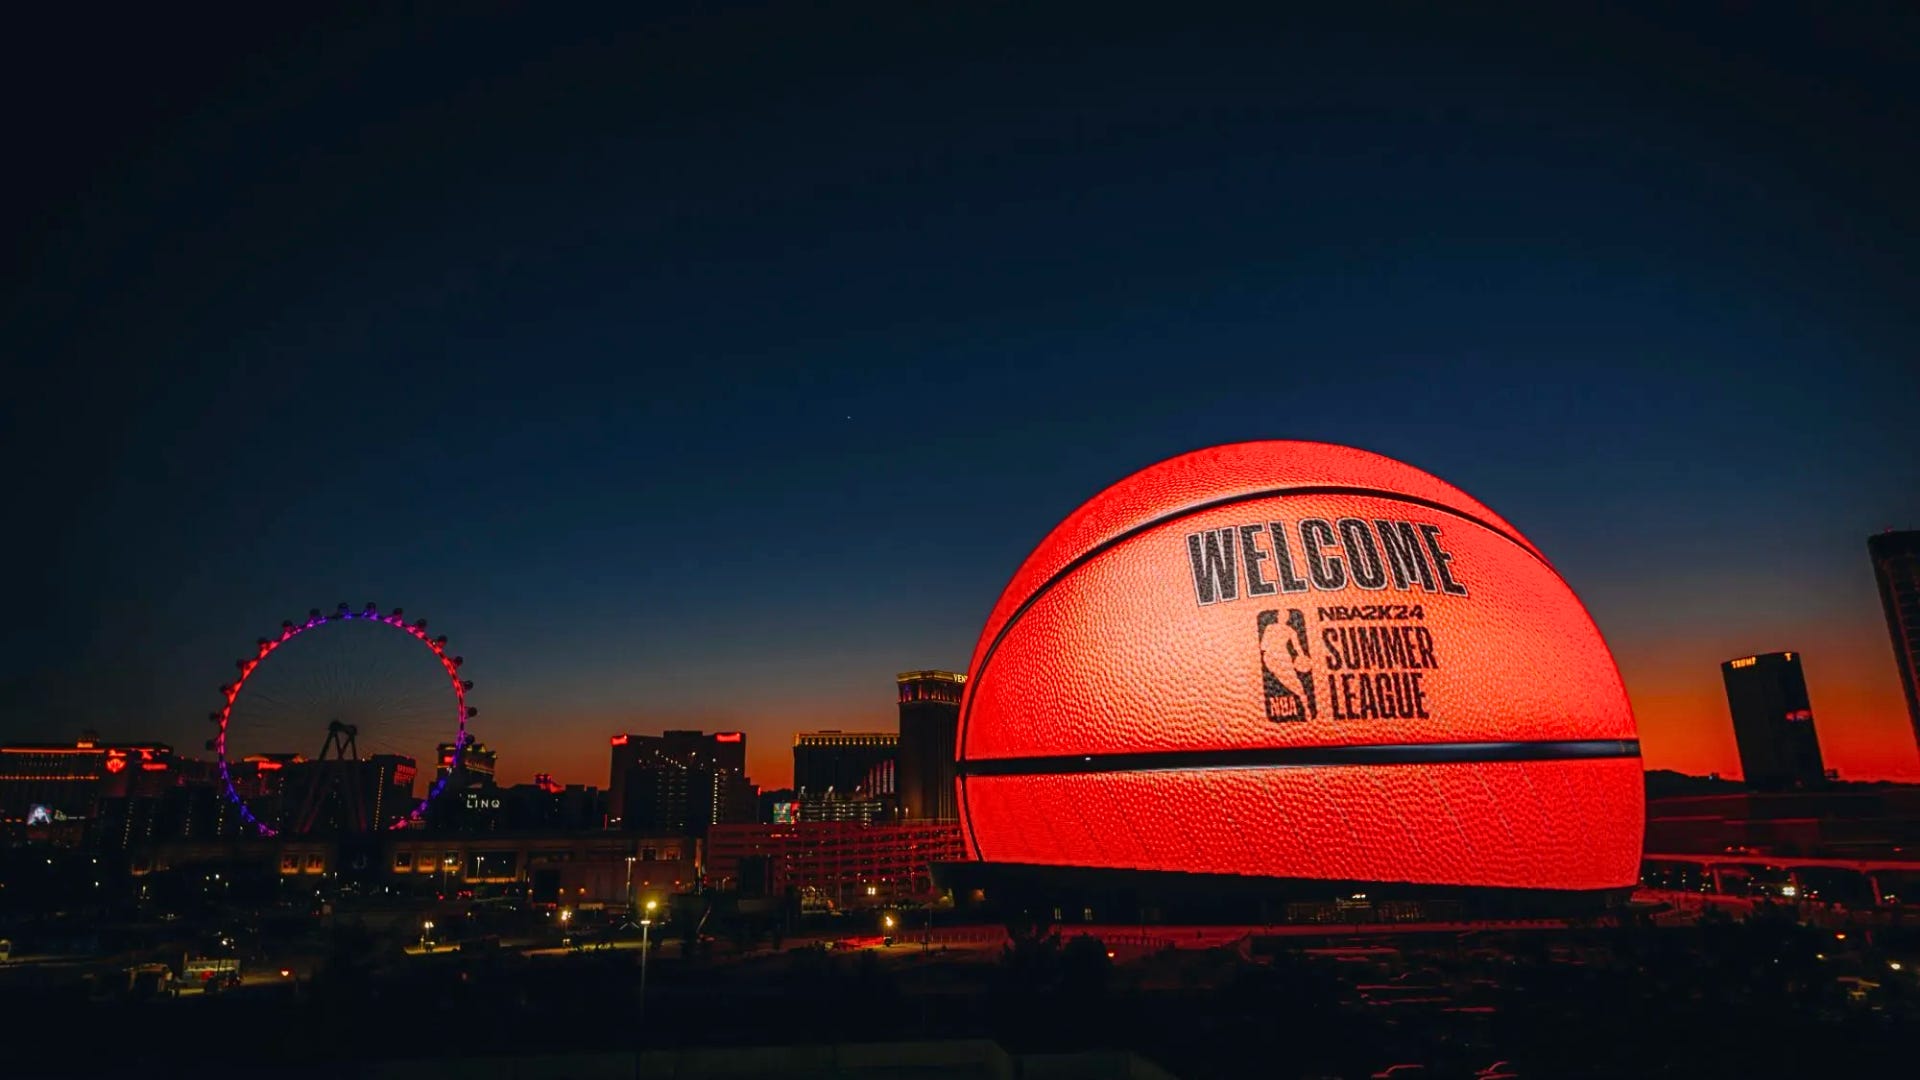 How The $2.3 Billion Sphere In Las Vegas Plans To Become A Global Brand